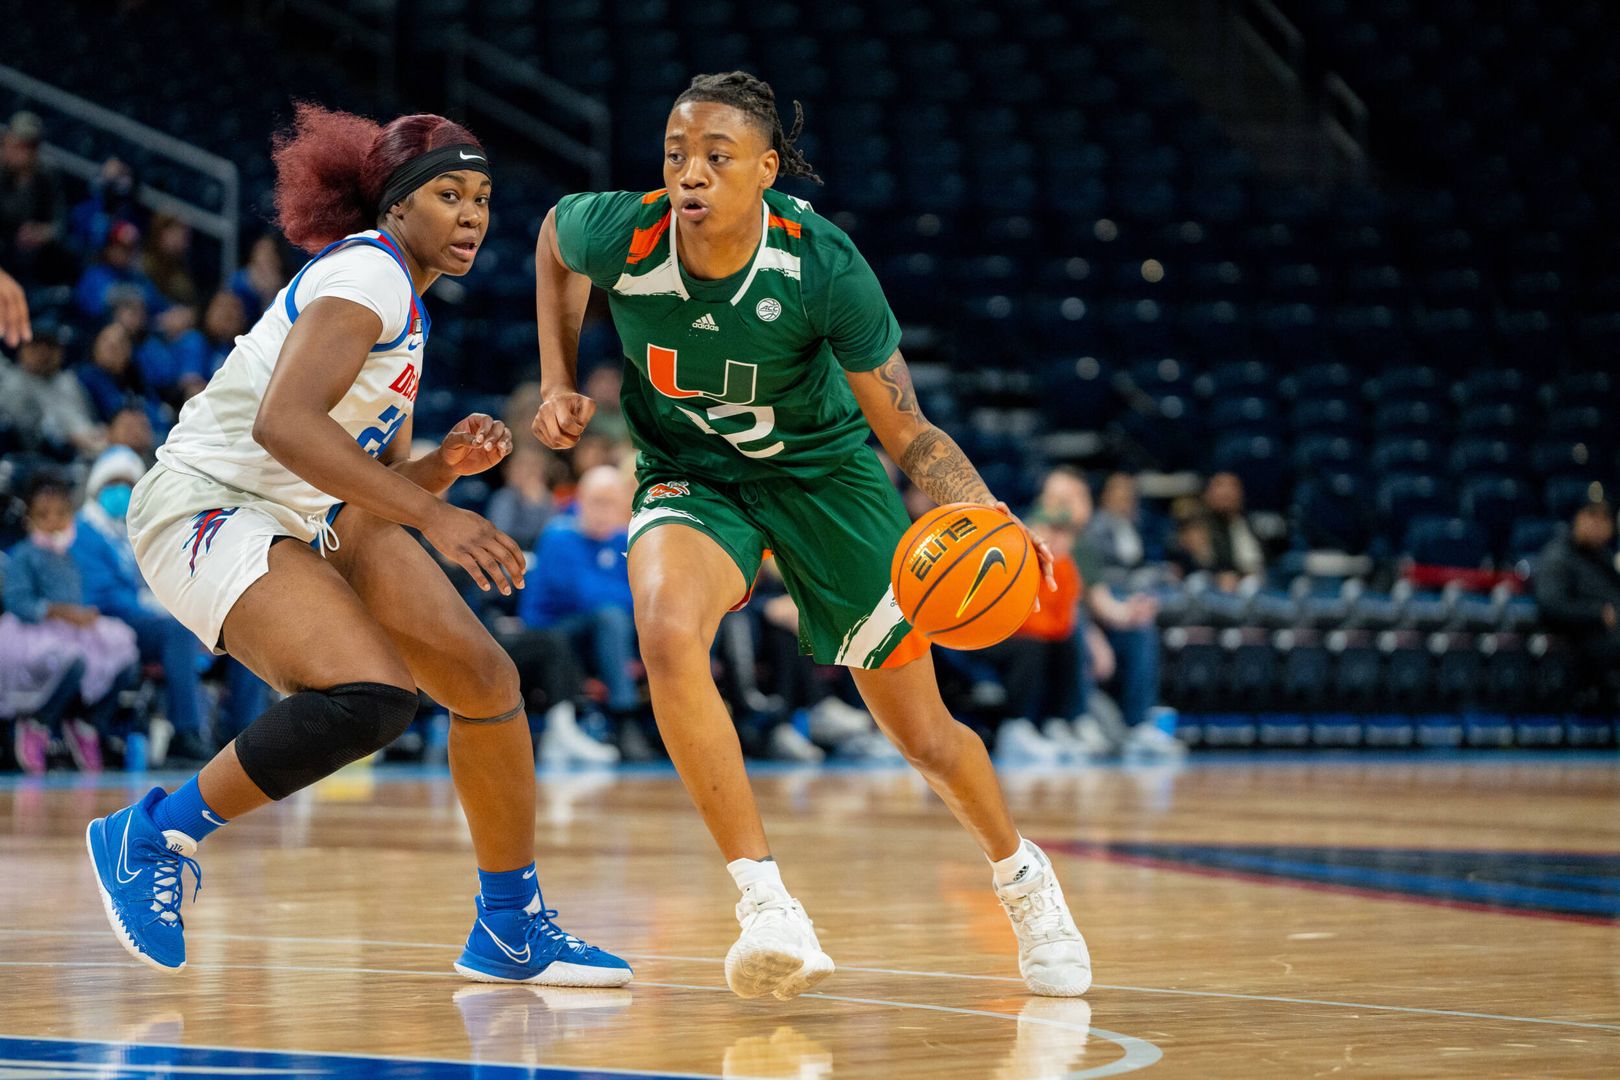 Miami Falls on the Road to DePaul